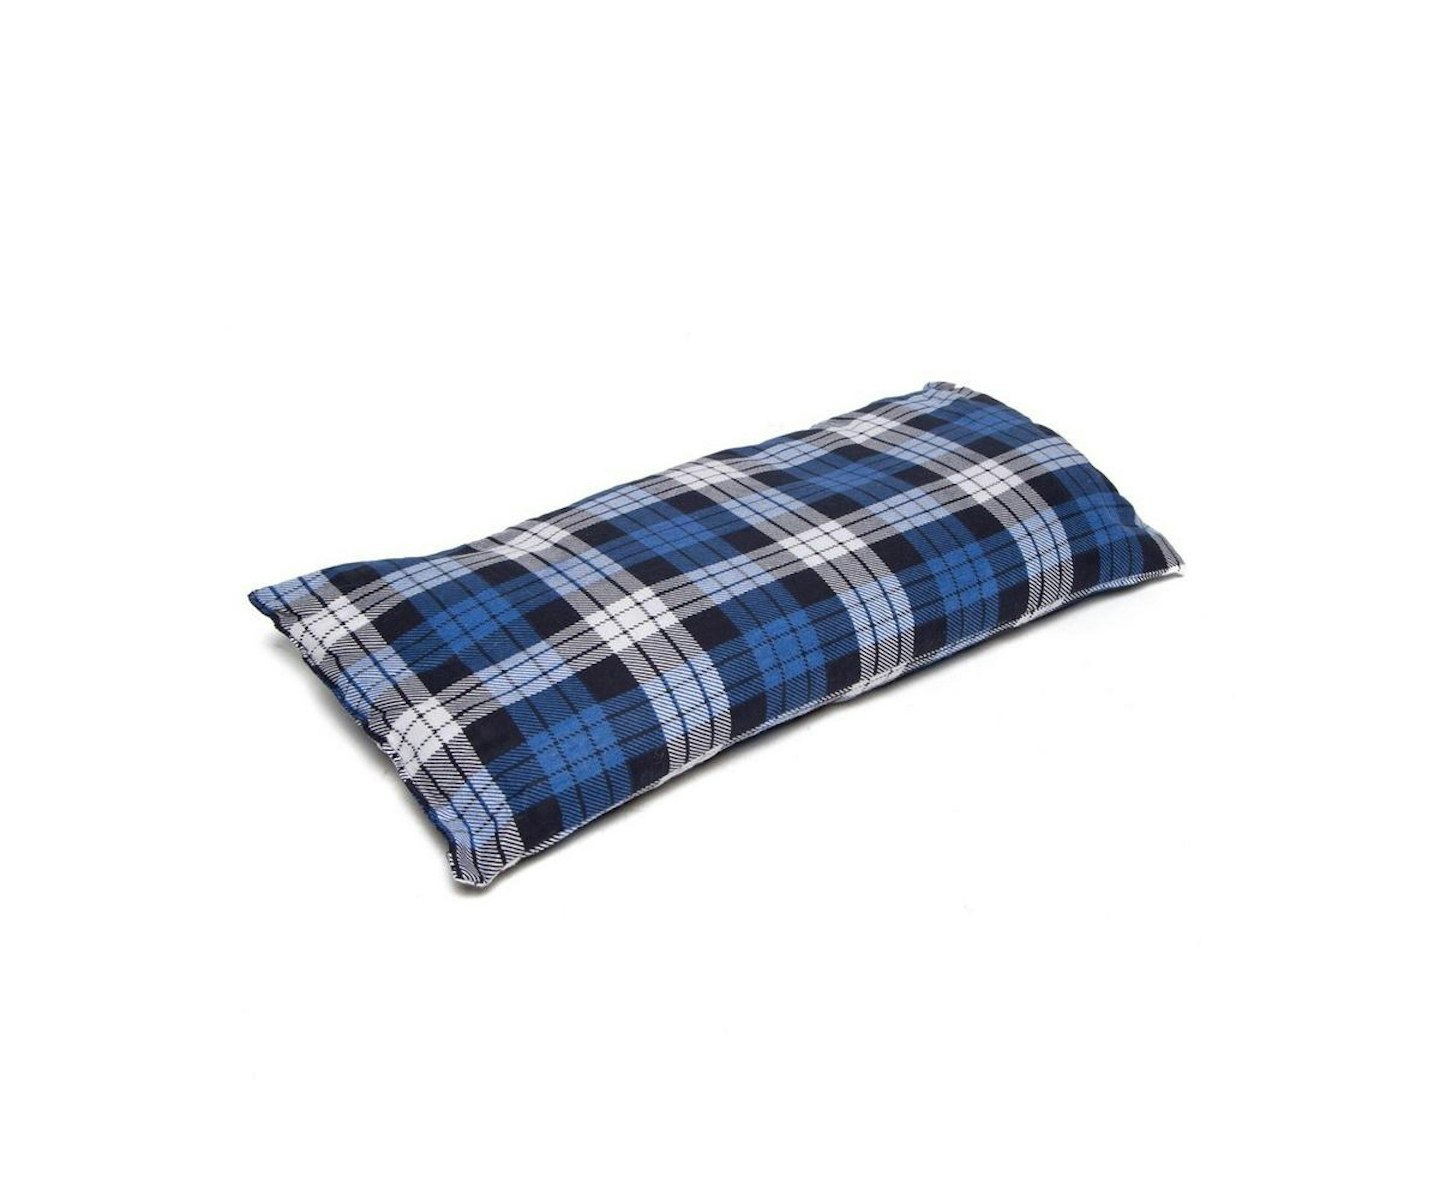 Flannel Pillow